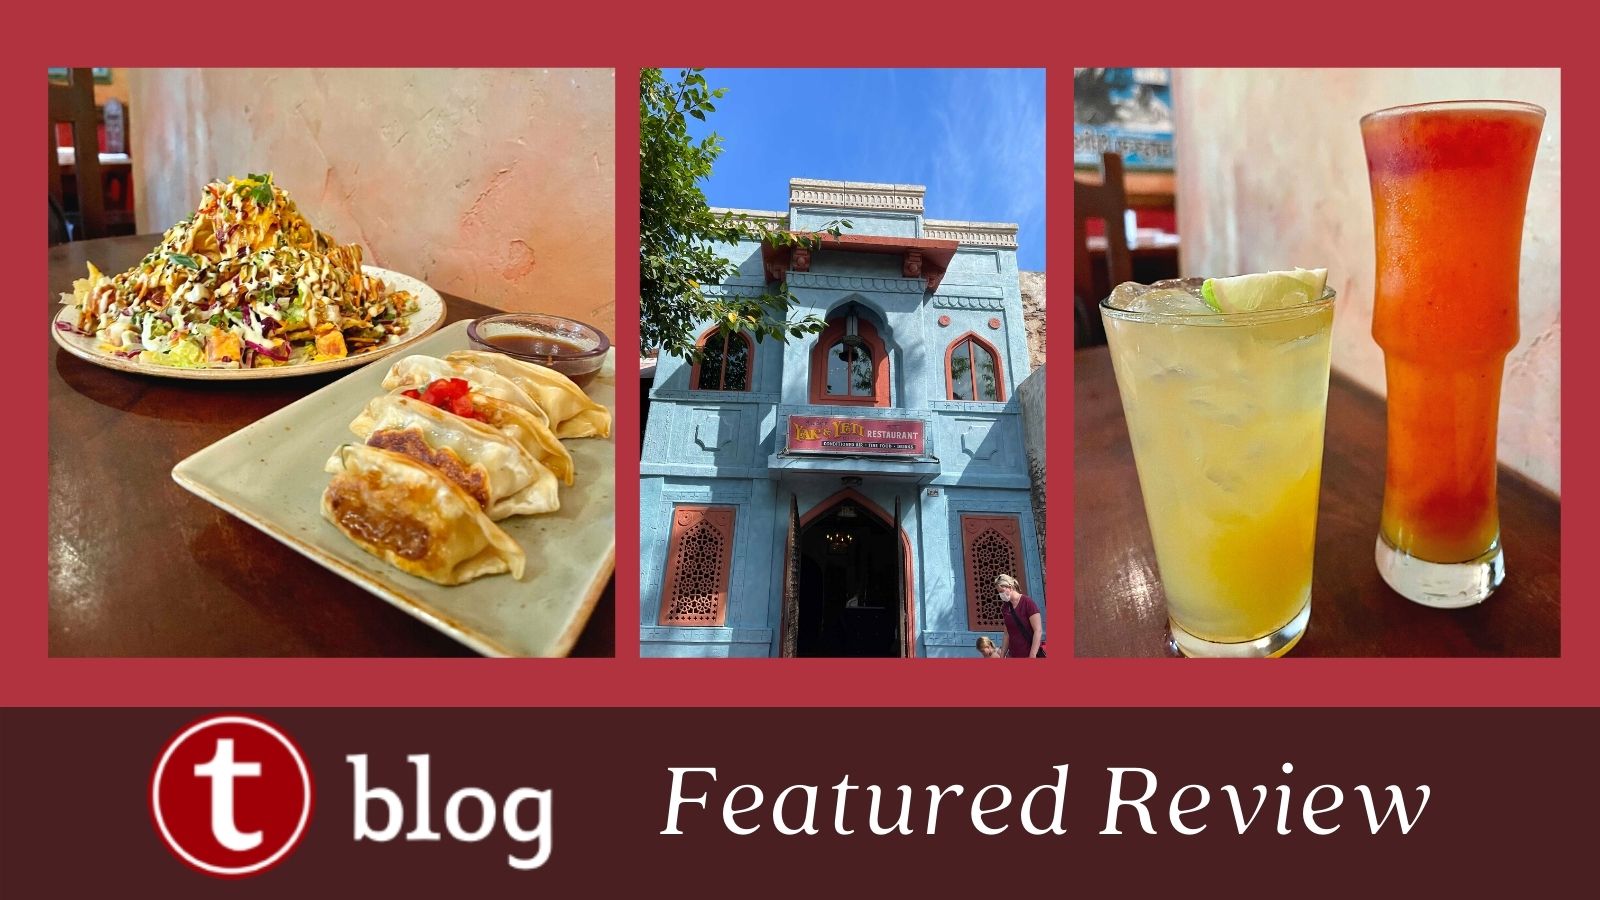 Review and PHOTOS! Is Yak & Yeti at Disney World's Animal Kingdom Still  Worth a Reservation?